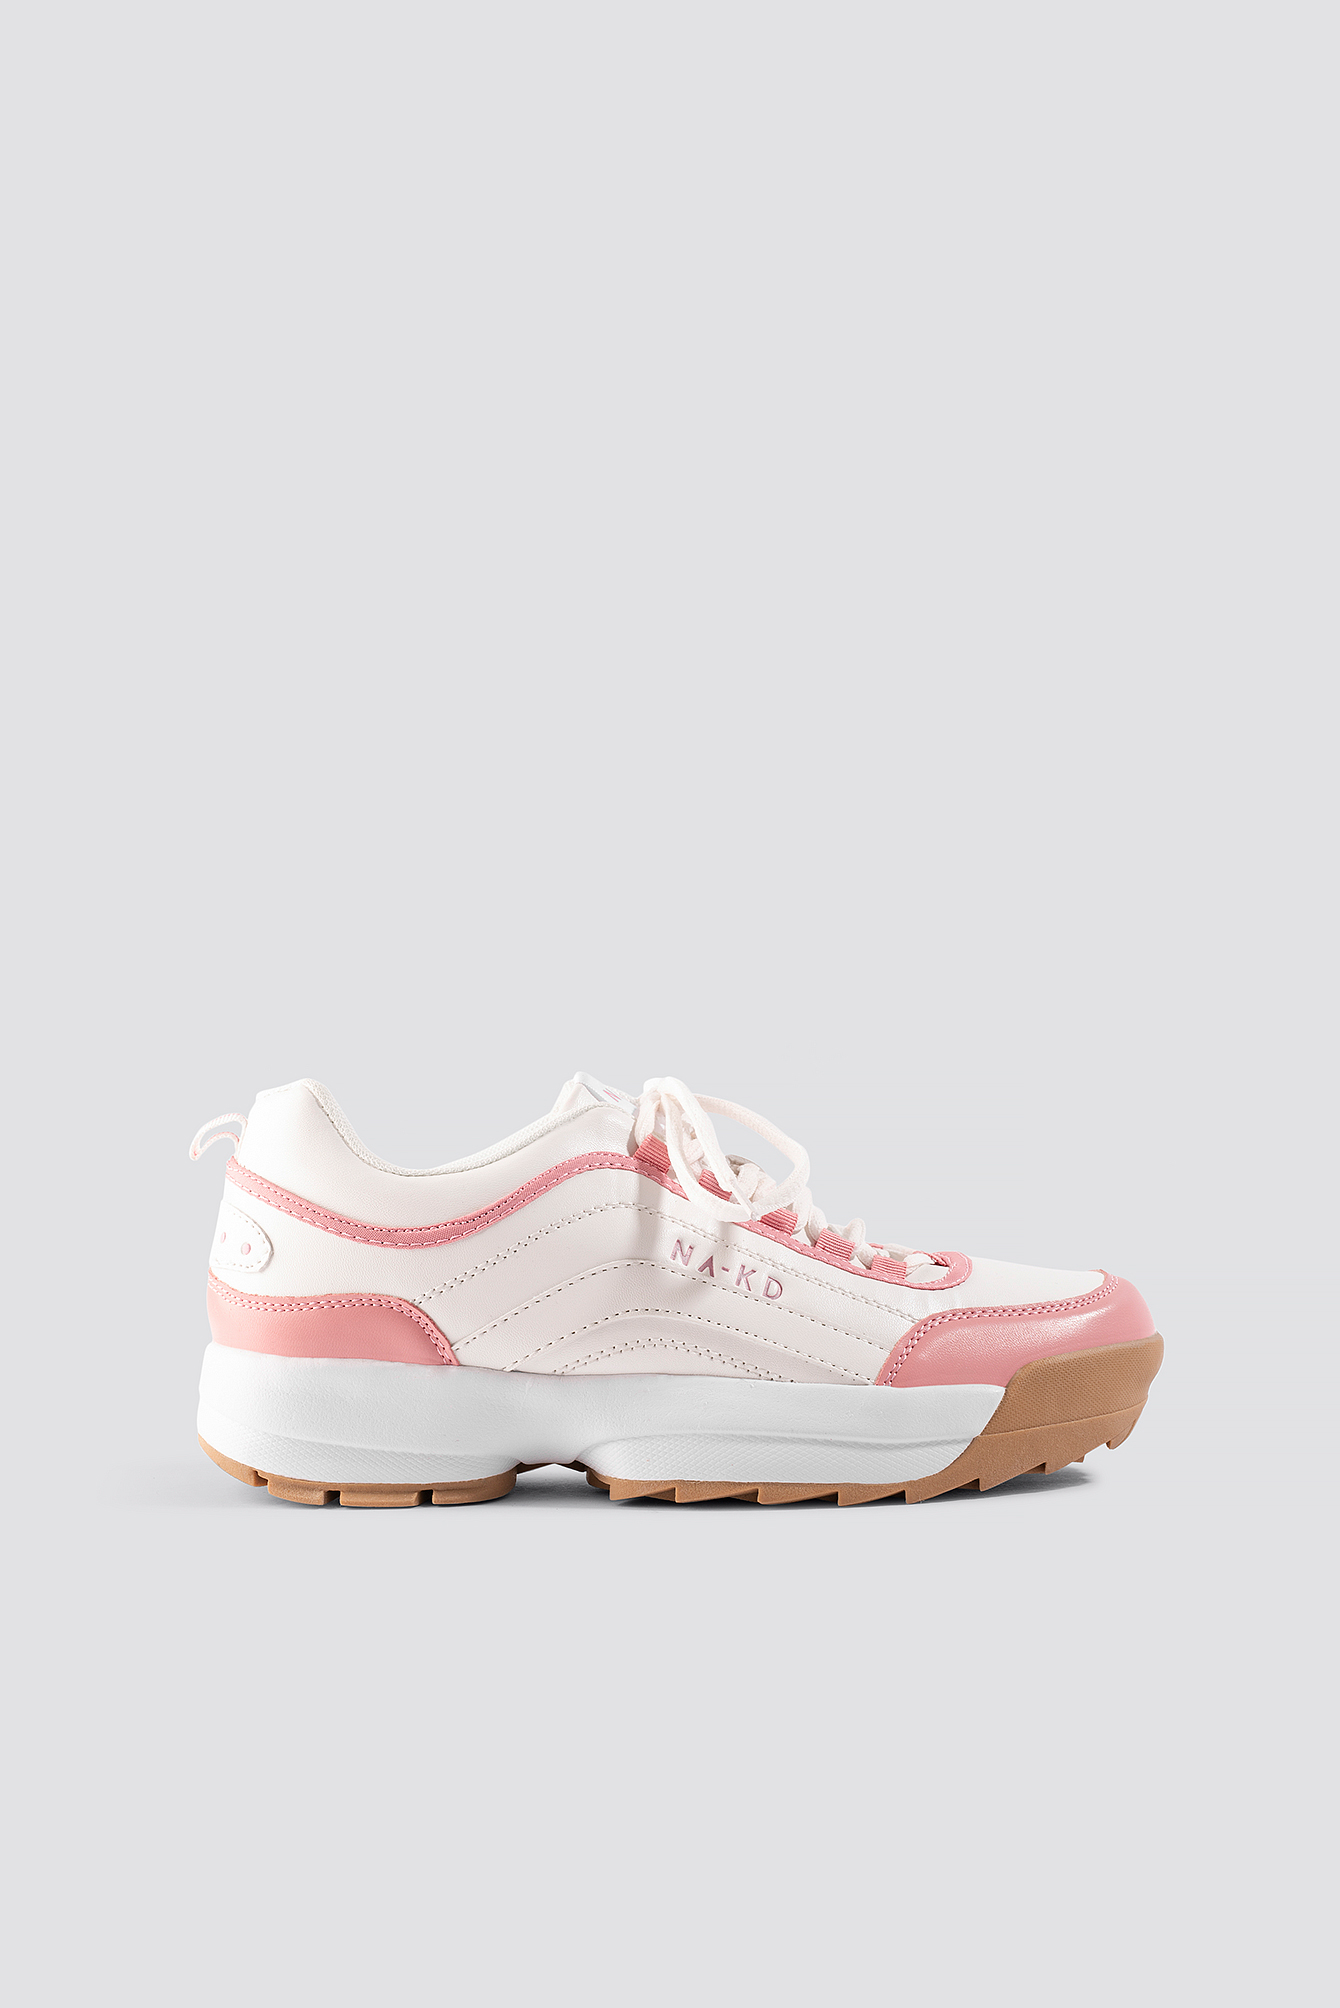 NA-KD Shoes Color Block Sneakers - Pink,White